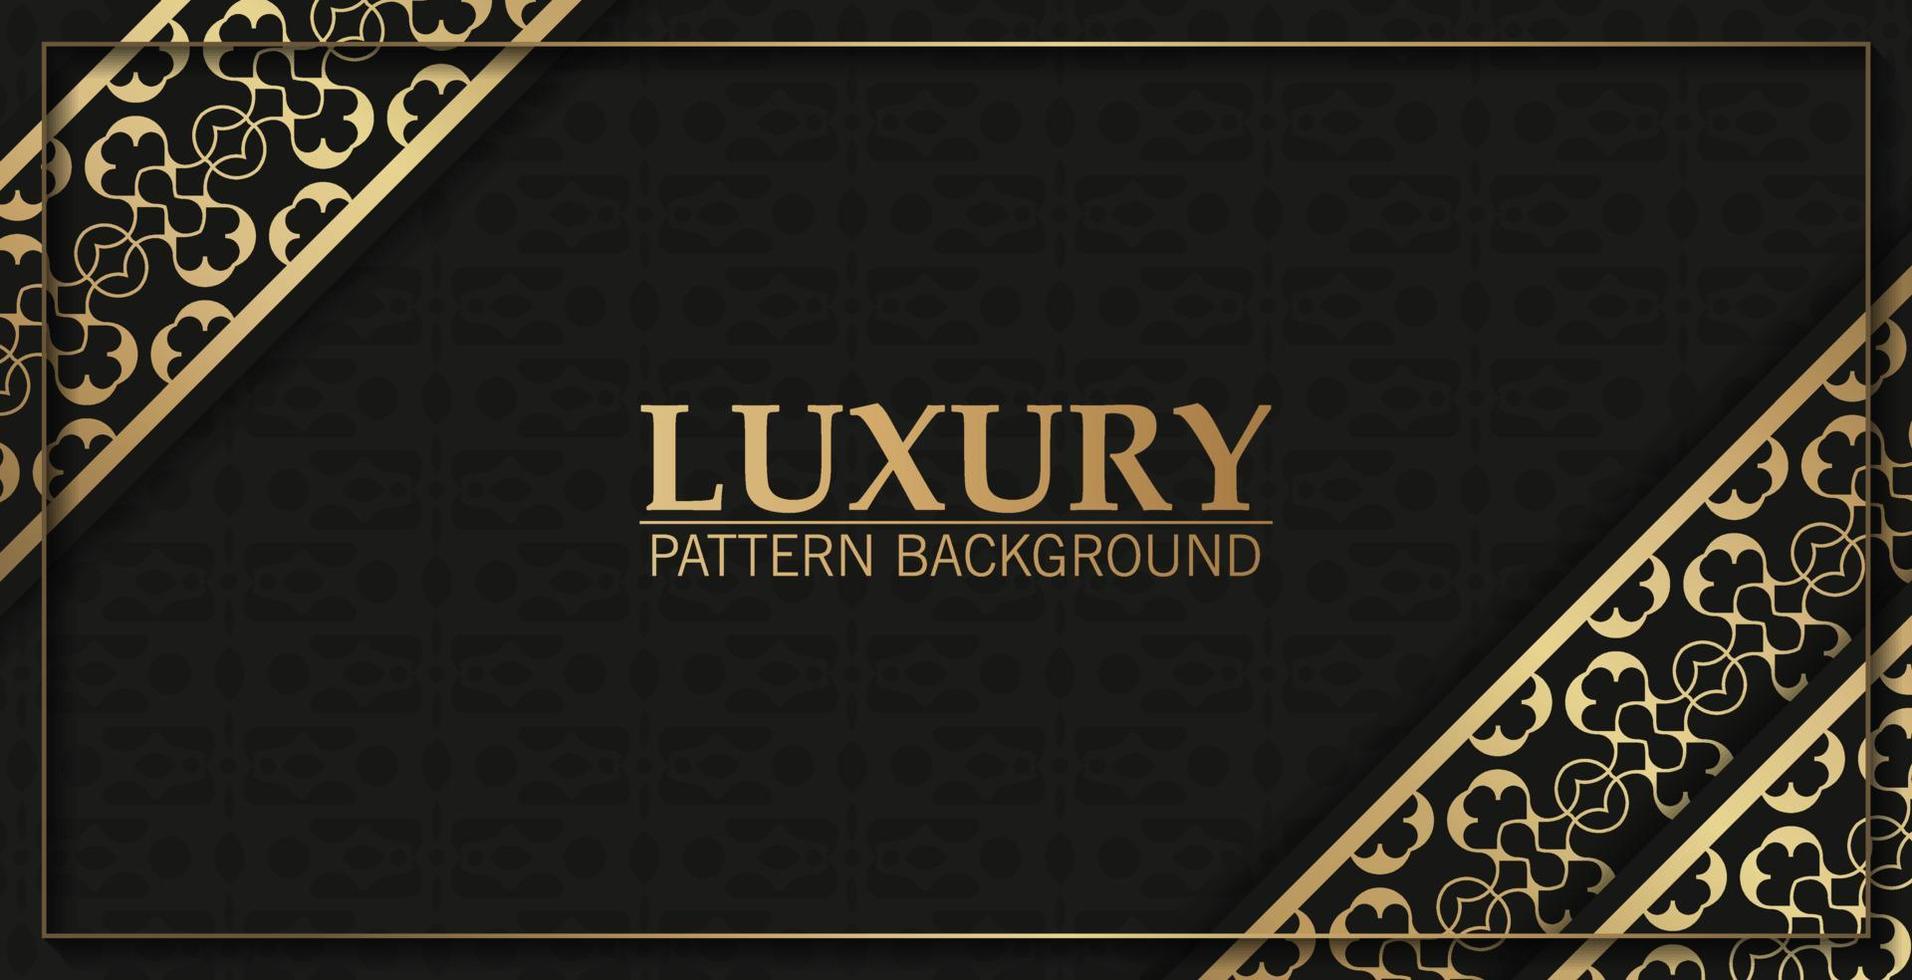 luxe rand ornament patroon achtergrond vector